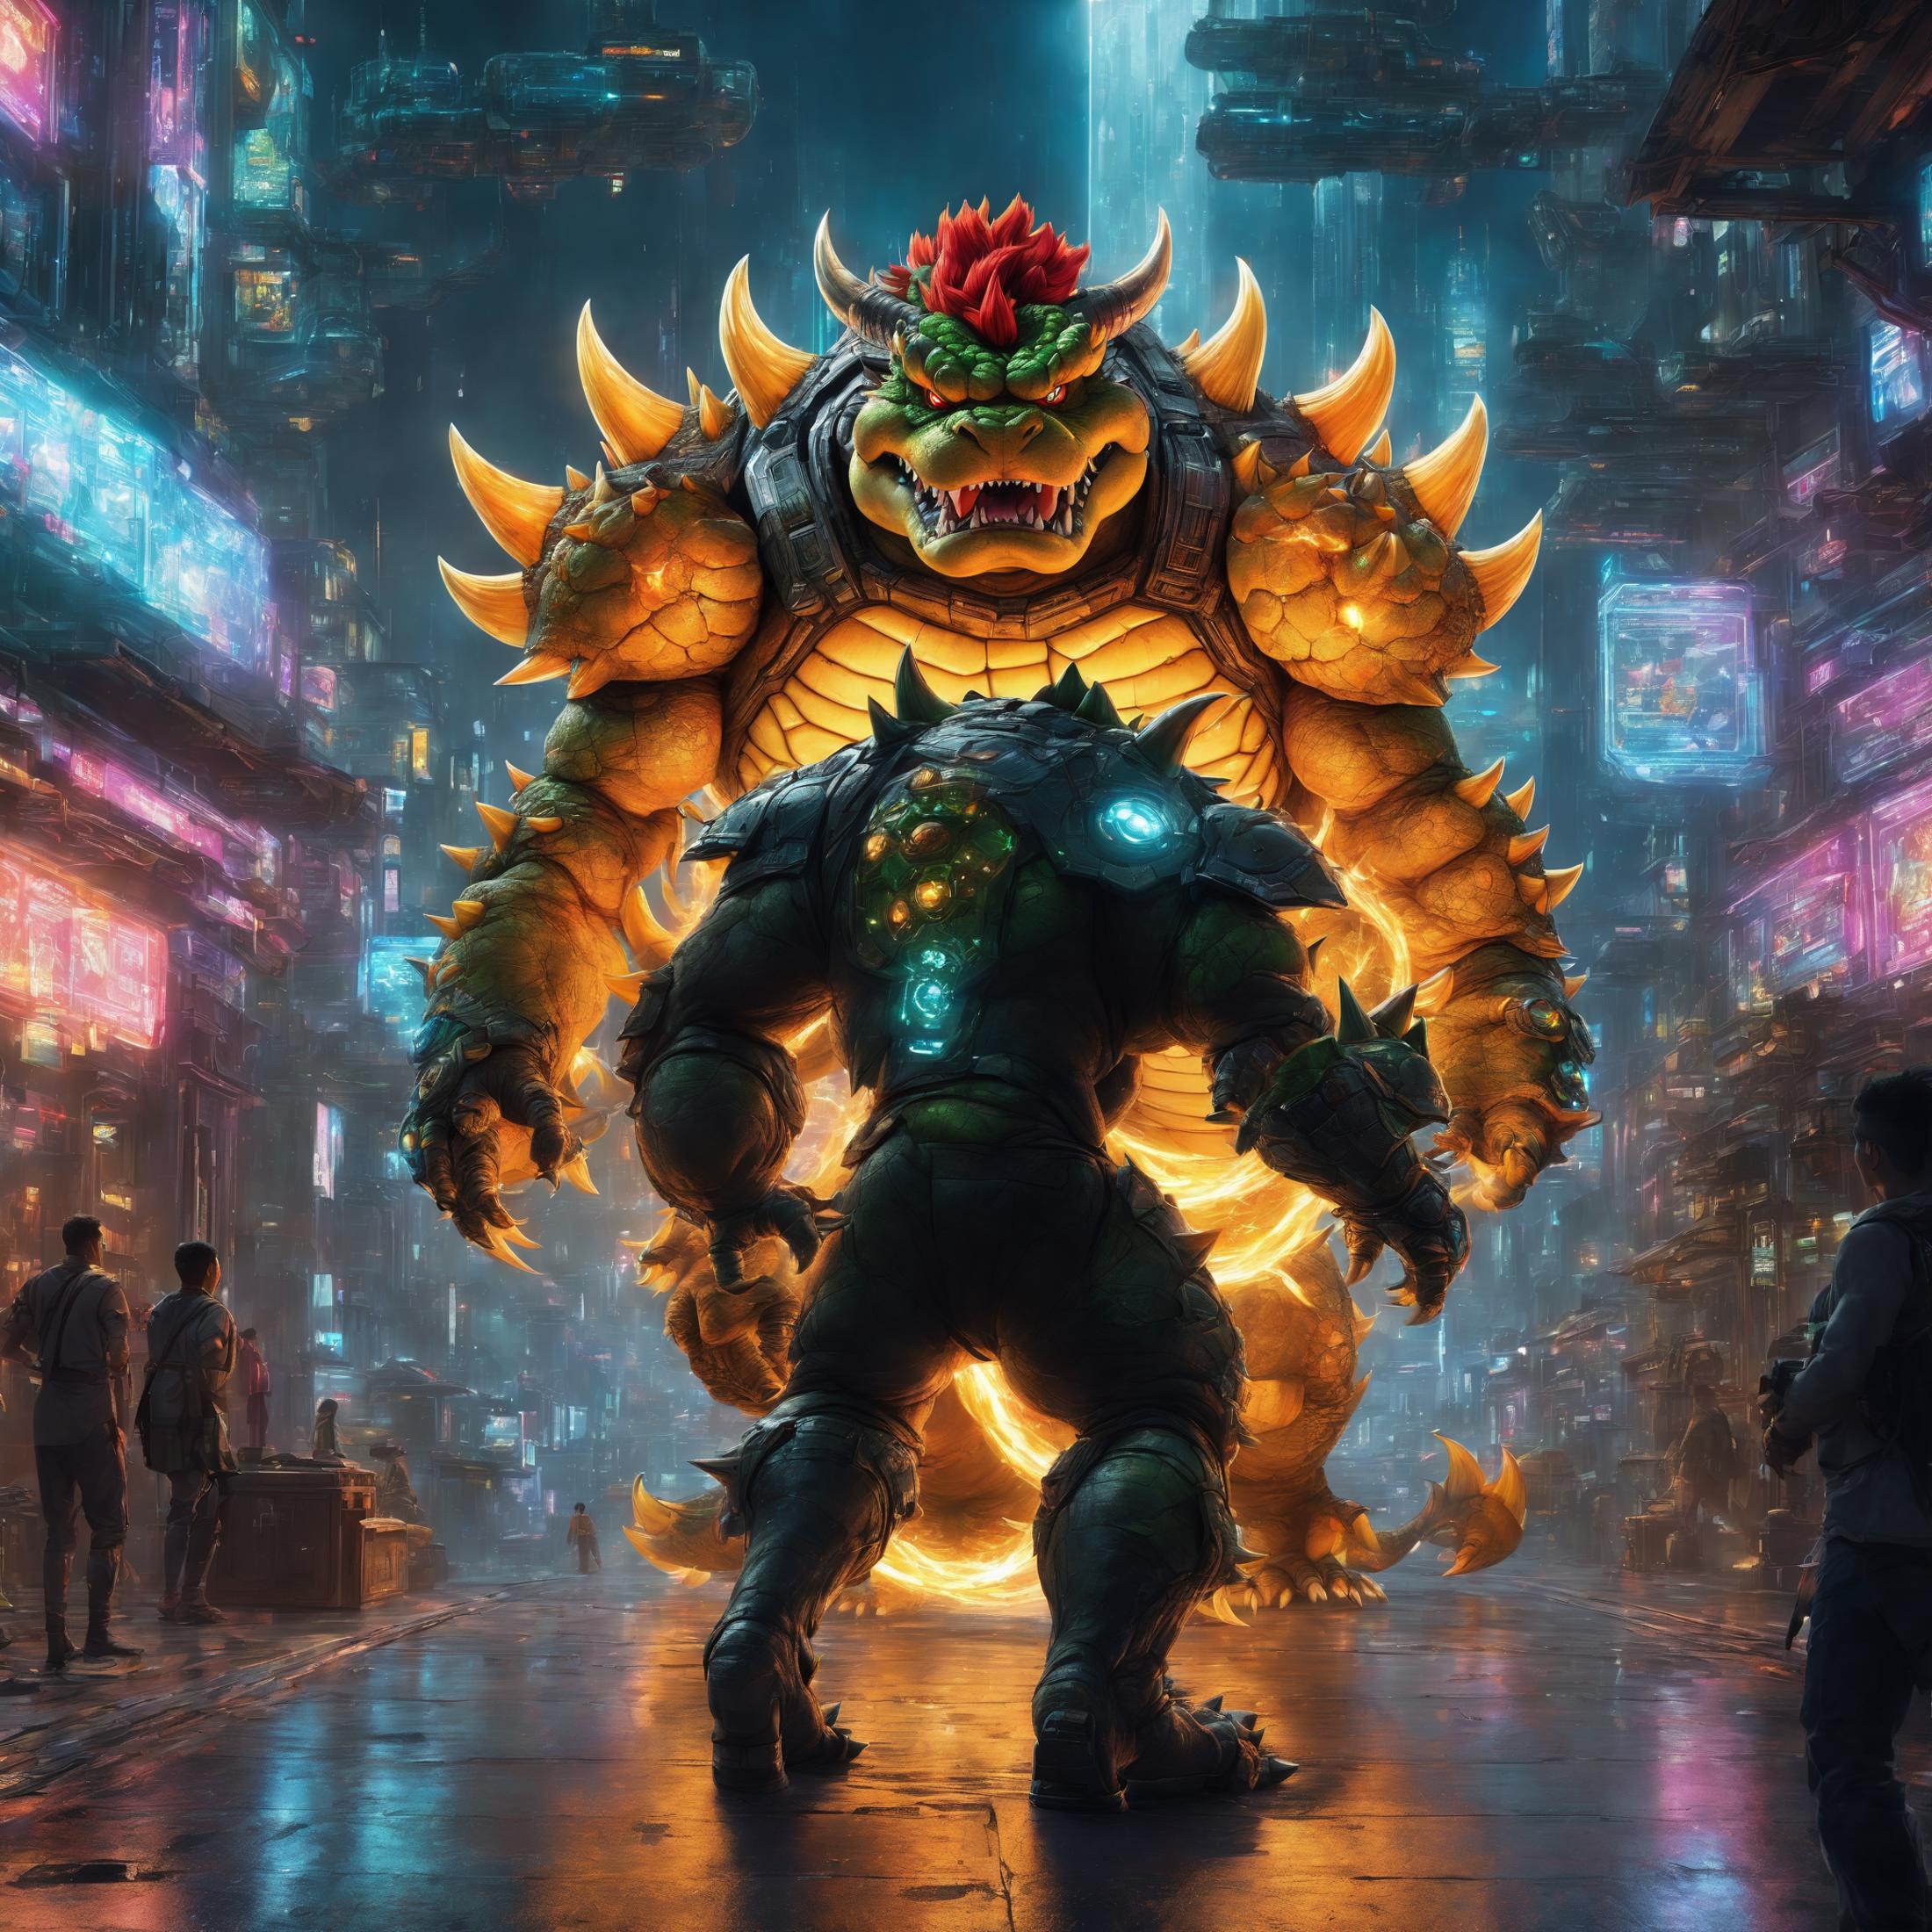 A giant robot with a red flower on its head is walking through a street, as people watch in awe.